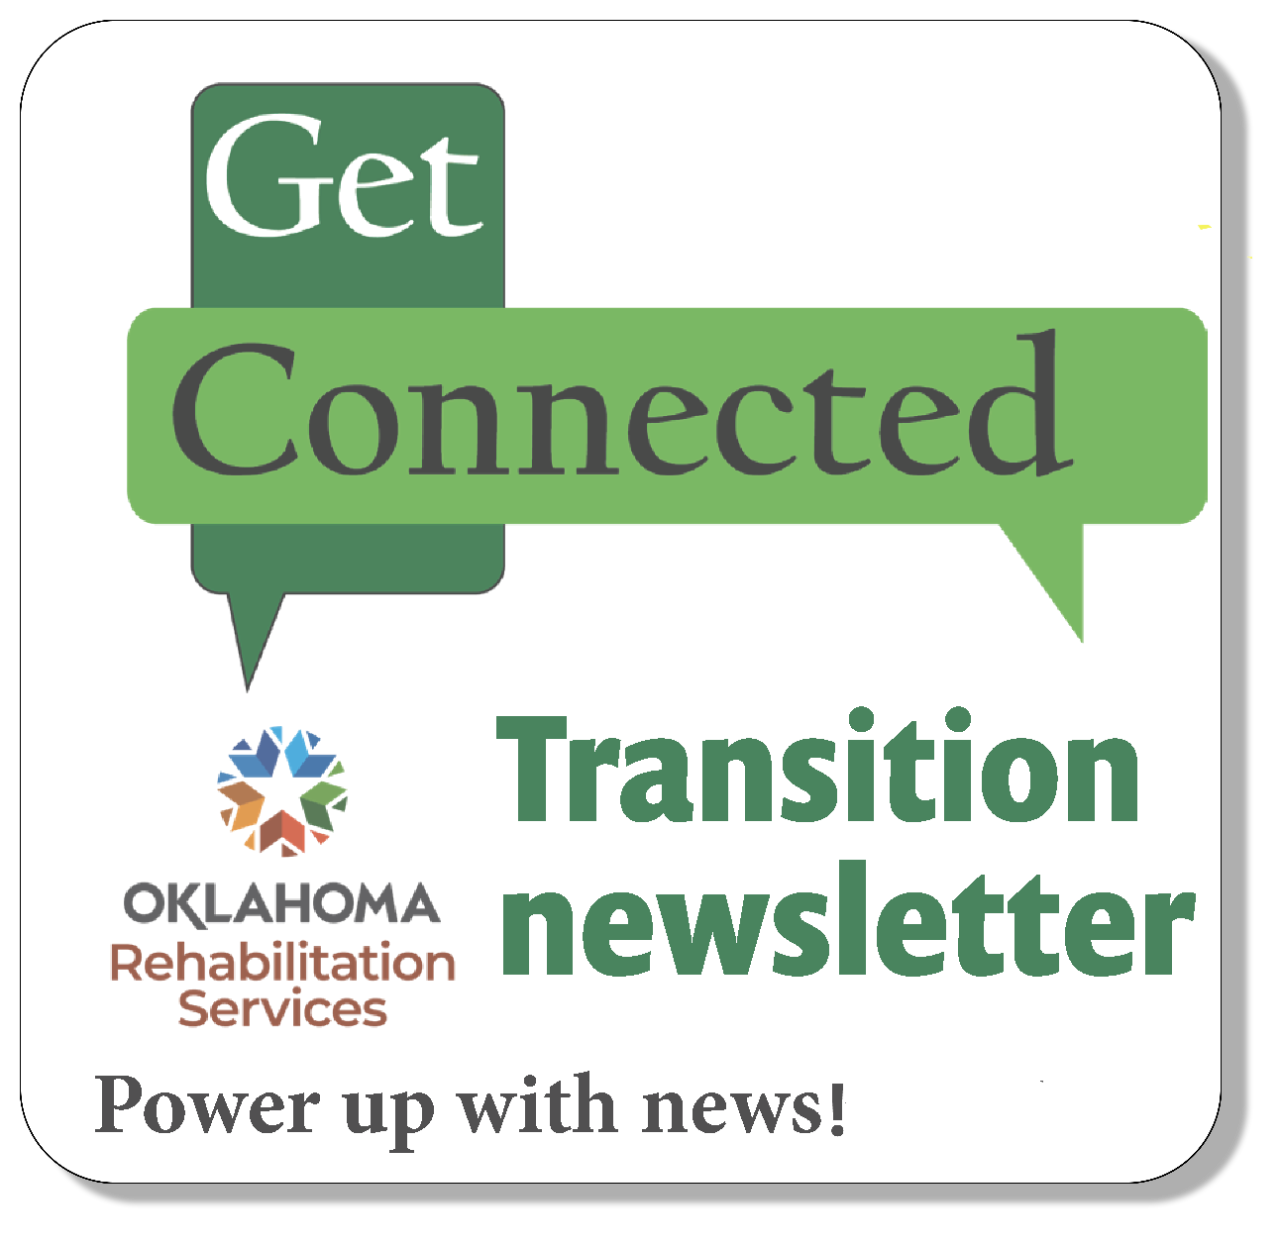 Get Connected, Transition Newsletter. DRS logo. Power up with news!